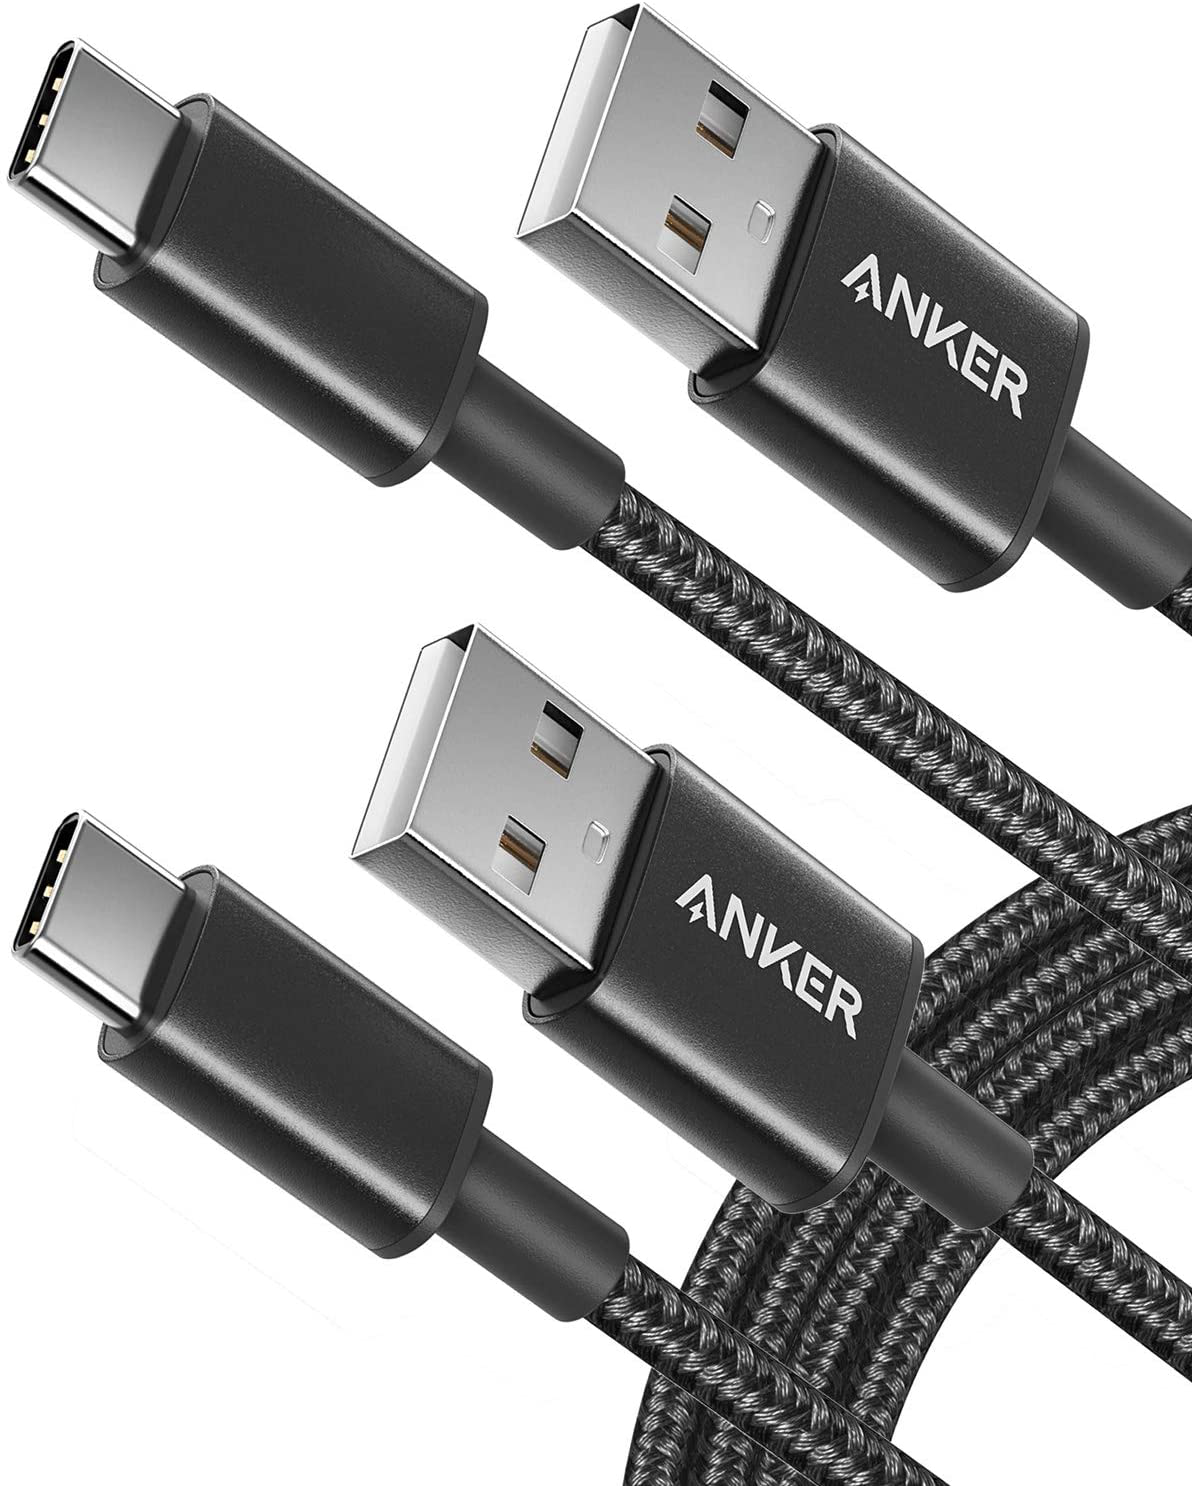 USB C Cable, Anker [2-Pack, 6 ft] Type C Charger Premium Nylon USB Cable , USB A to Type C Charging Cable Fast Charge for Samsung Galaxy S10 S10+ / Note 8, LG V20 and Other USB C Charger